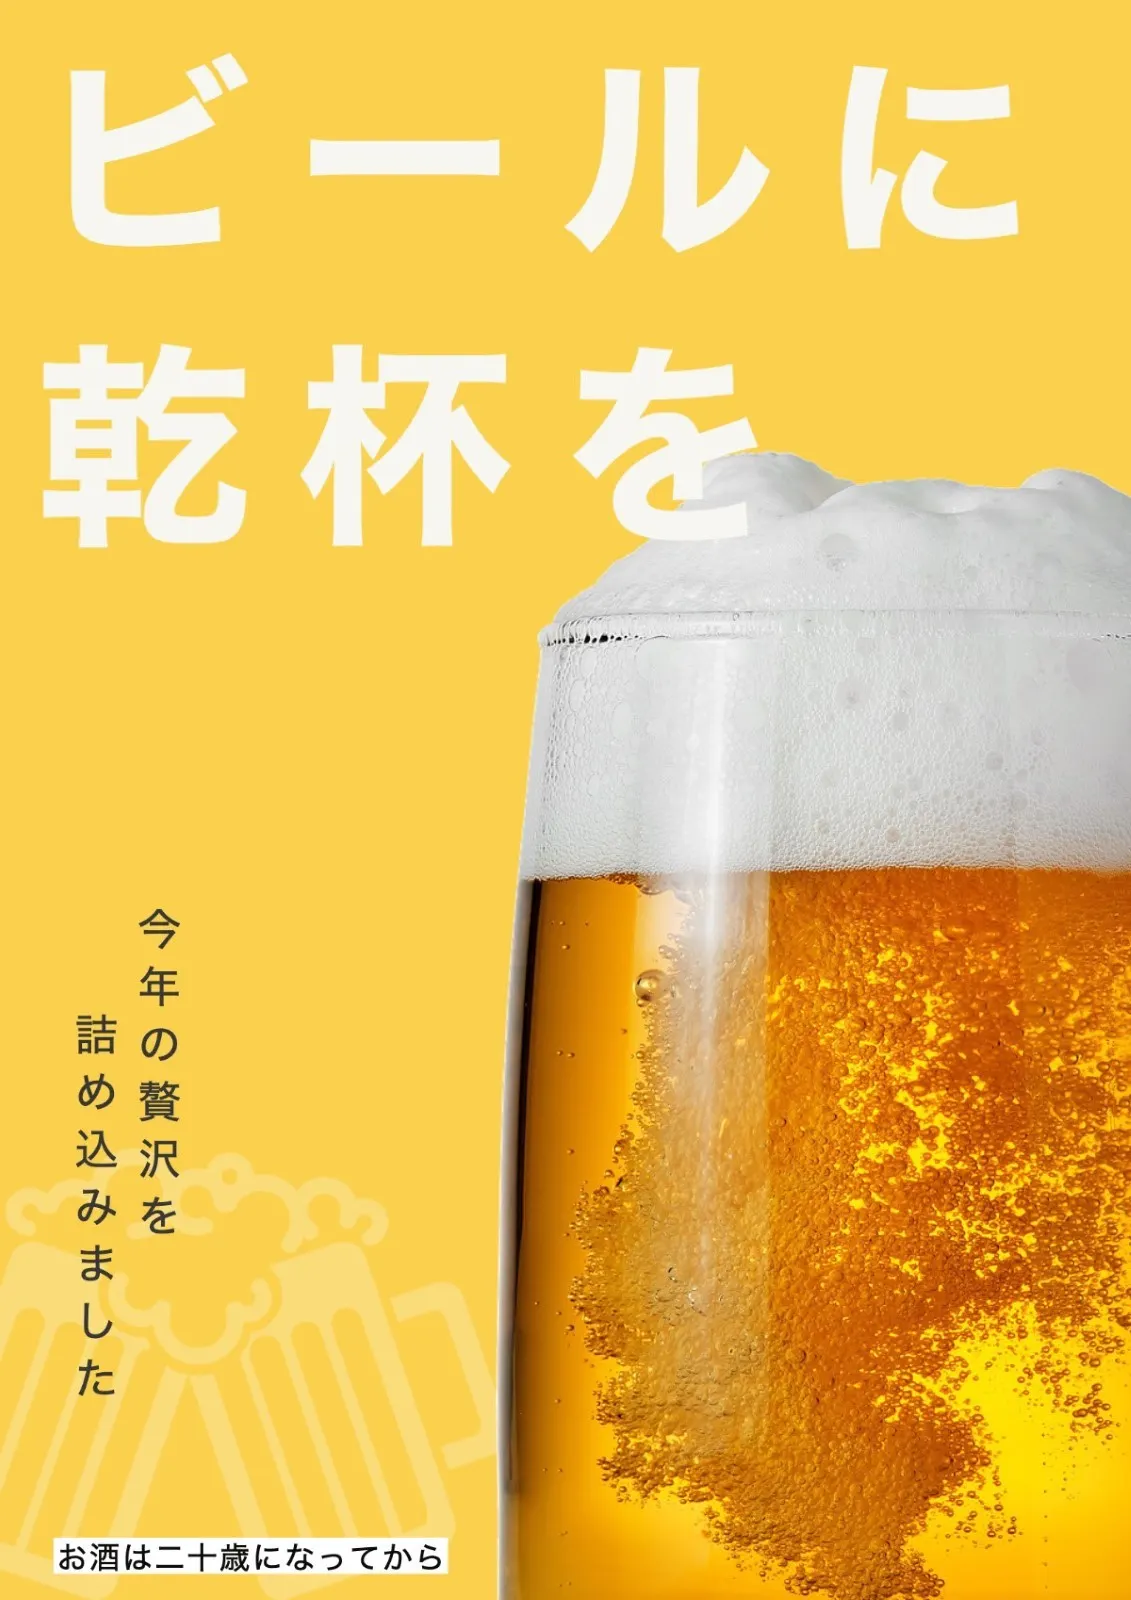 Ad poster of beer